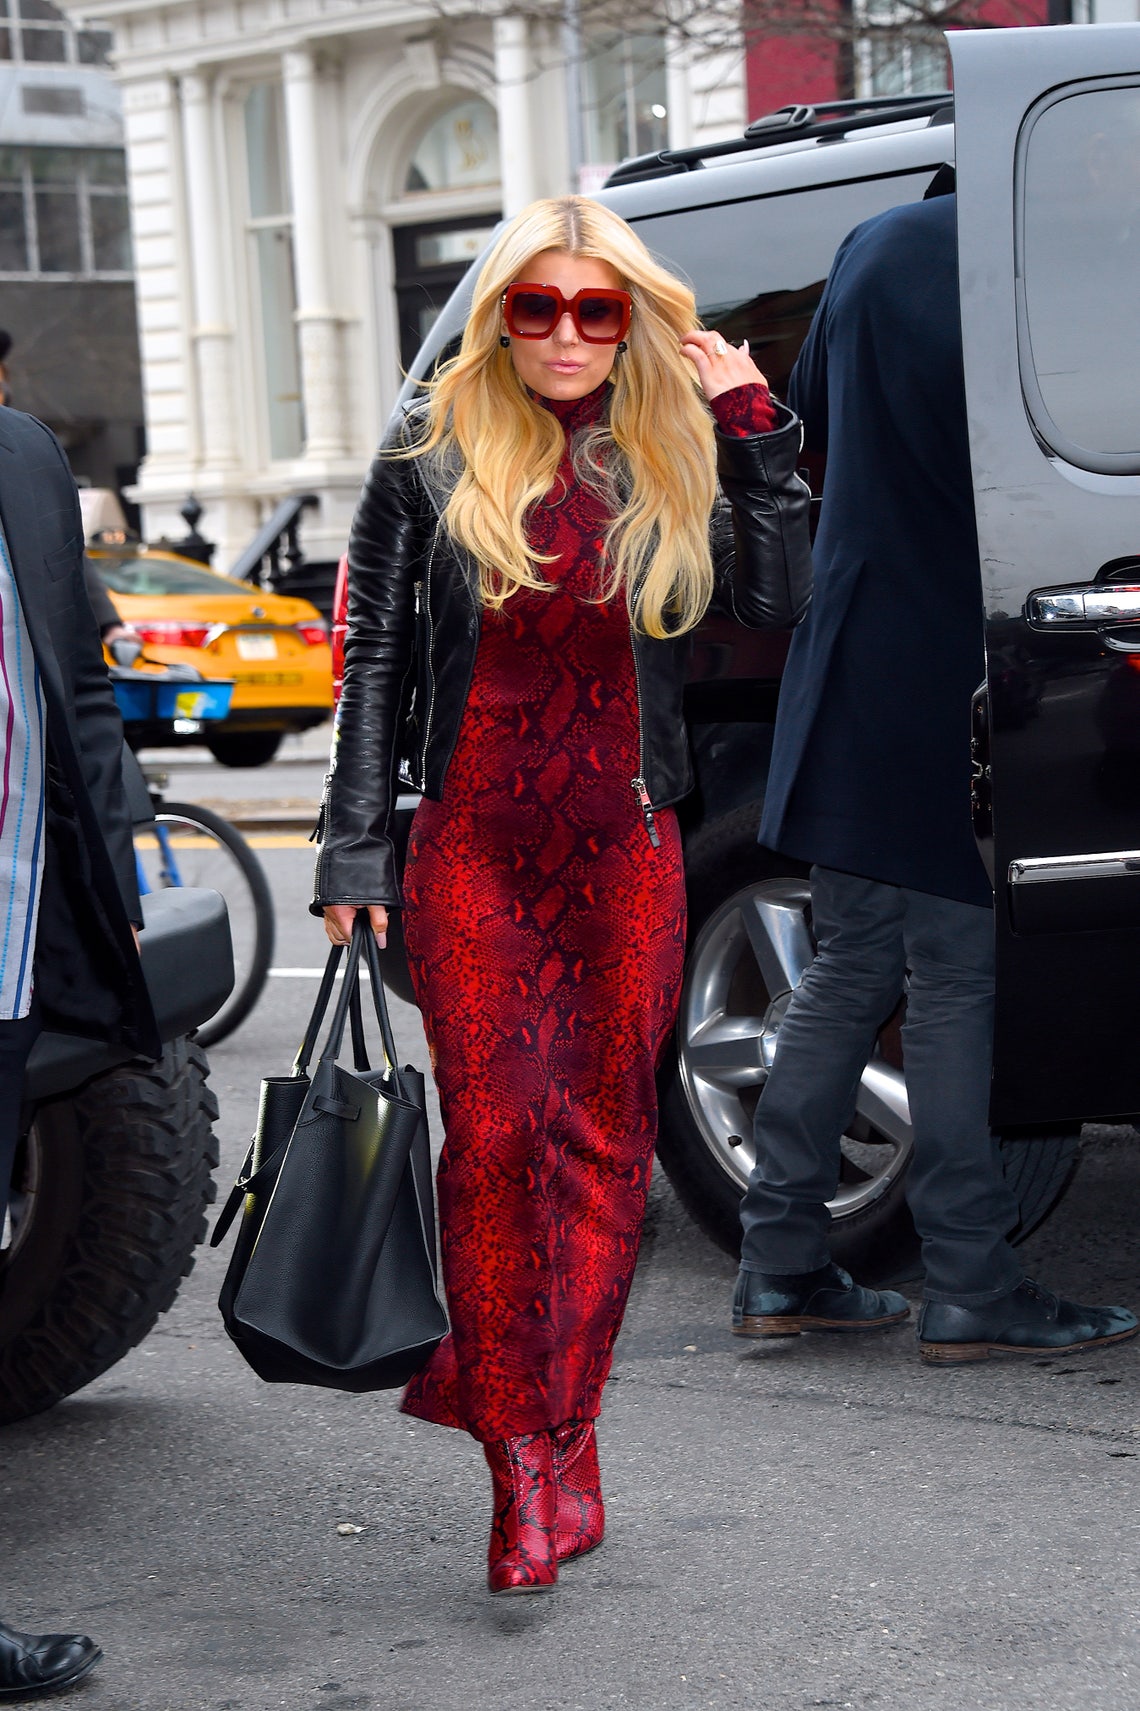 Jessica Simpson On 'Open Book' Press Tour: Photos Of Her Outfits